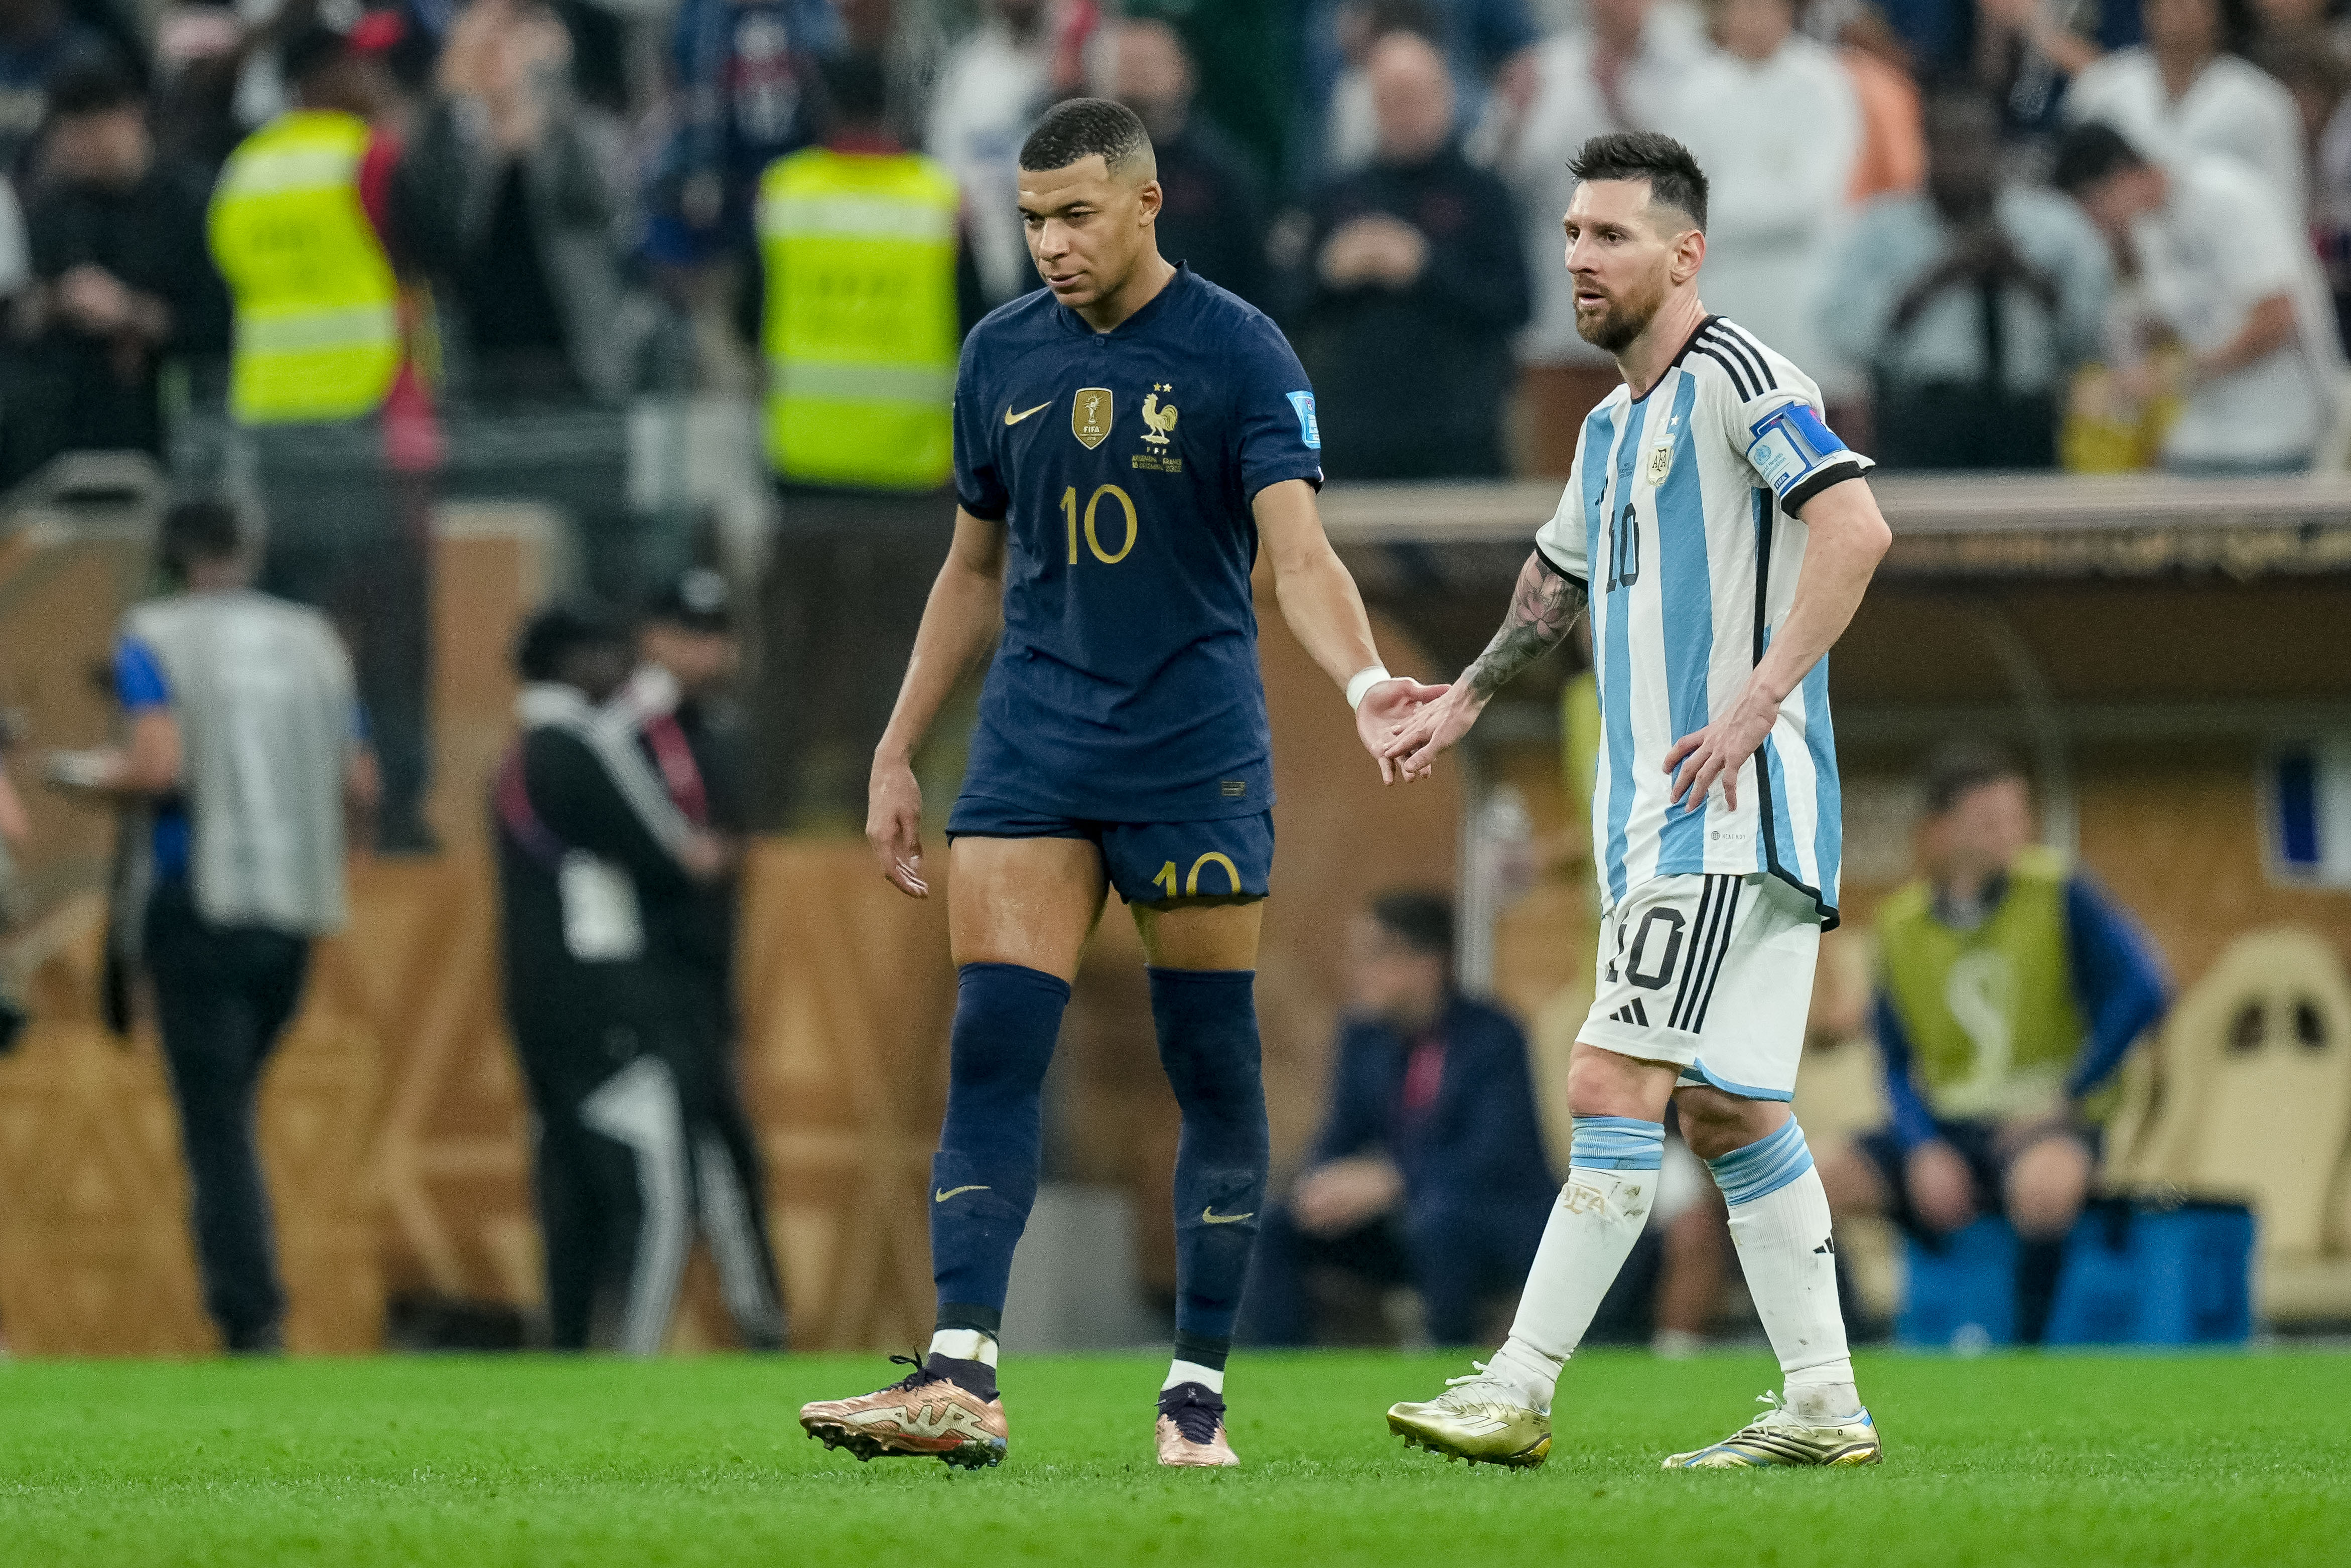 Kylian Mbappé and Lionel Messi shake hands during the 2022 World Cup final in Qatar.